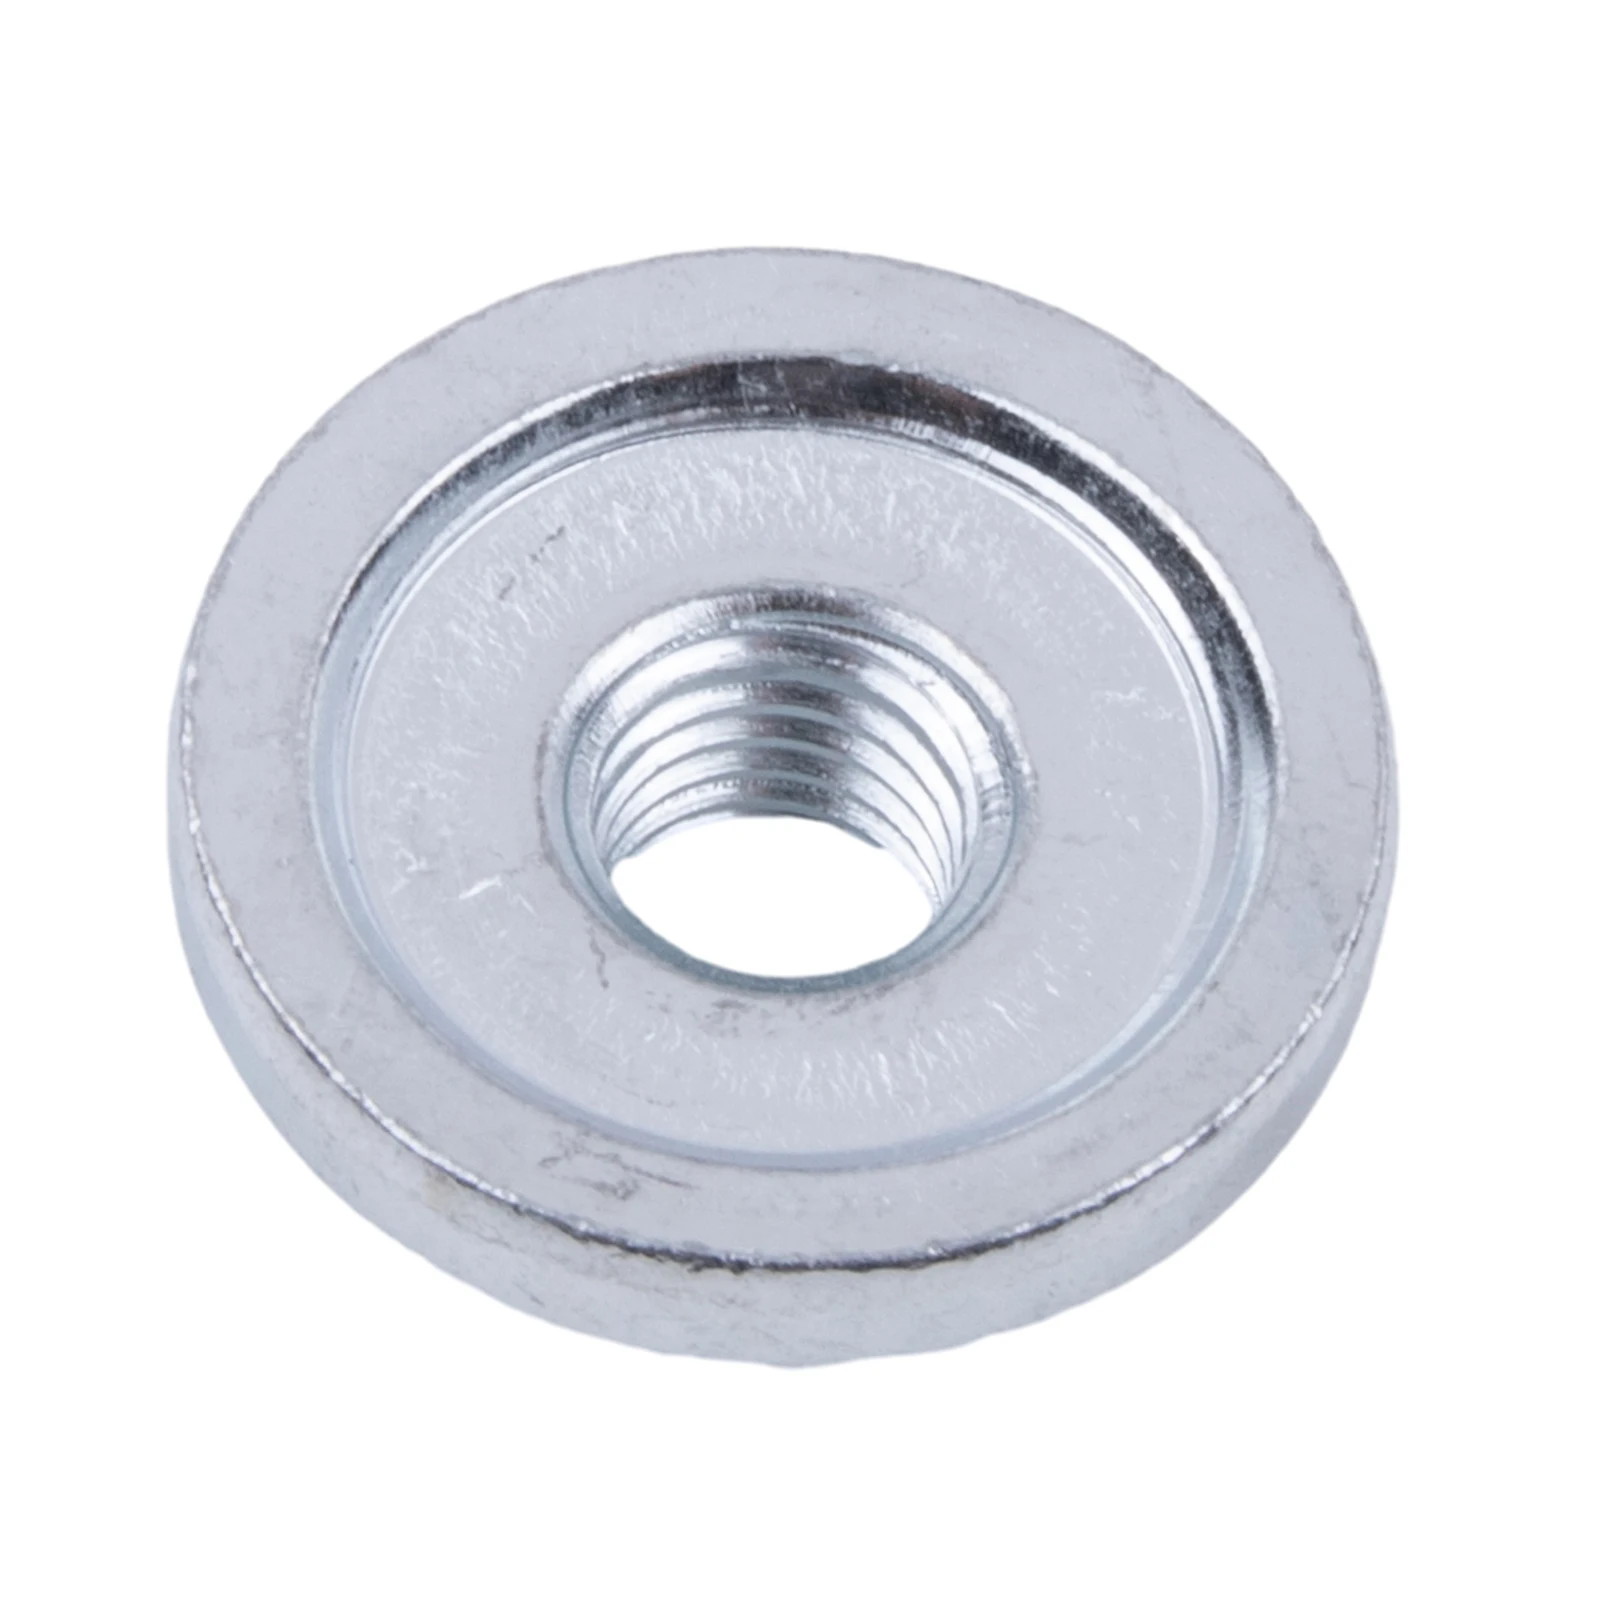 

Hexagon Nut Pressure Plate For 100 Type Angle Grinder Stainless Steel Anti-rust 17mm Silver Durable New Power Tool Accessories